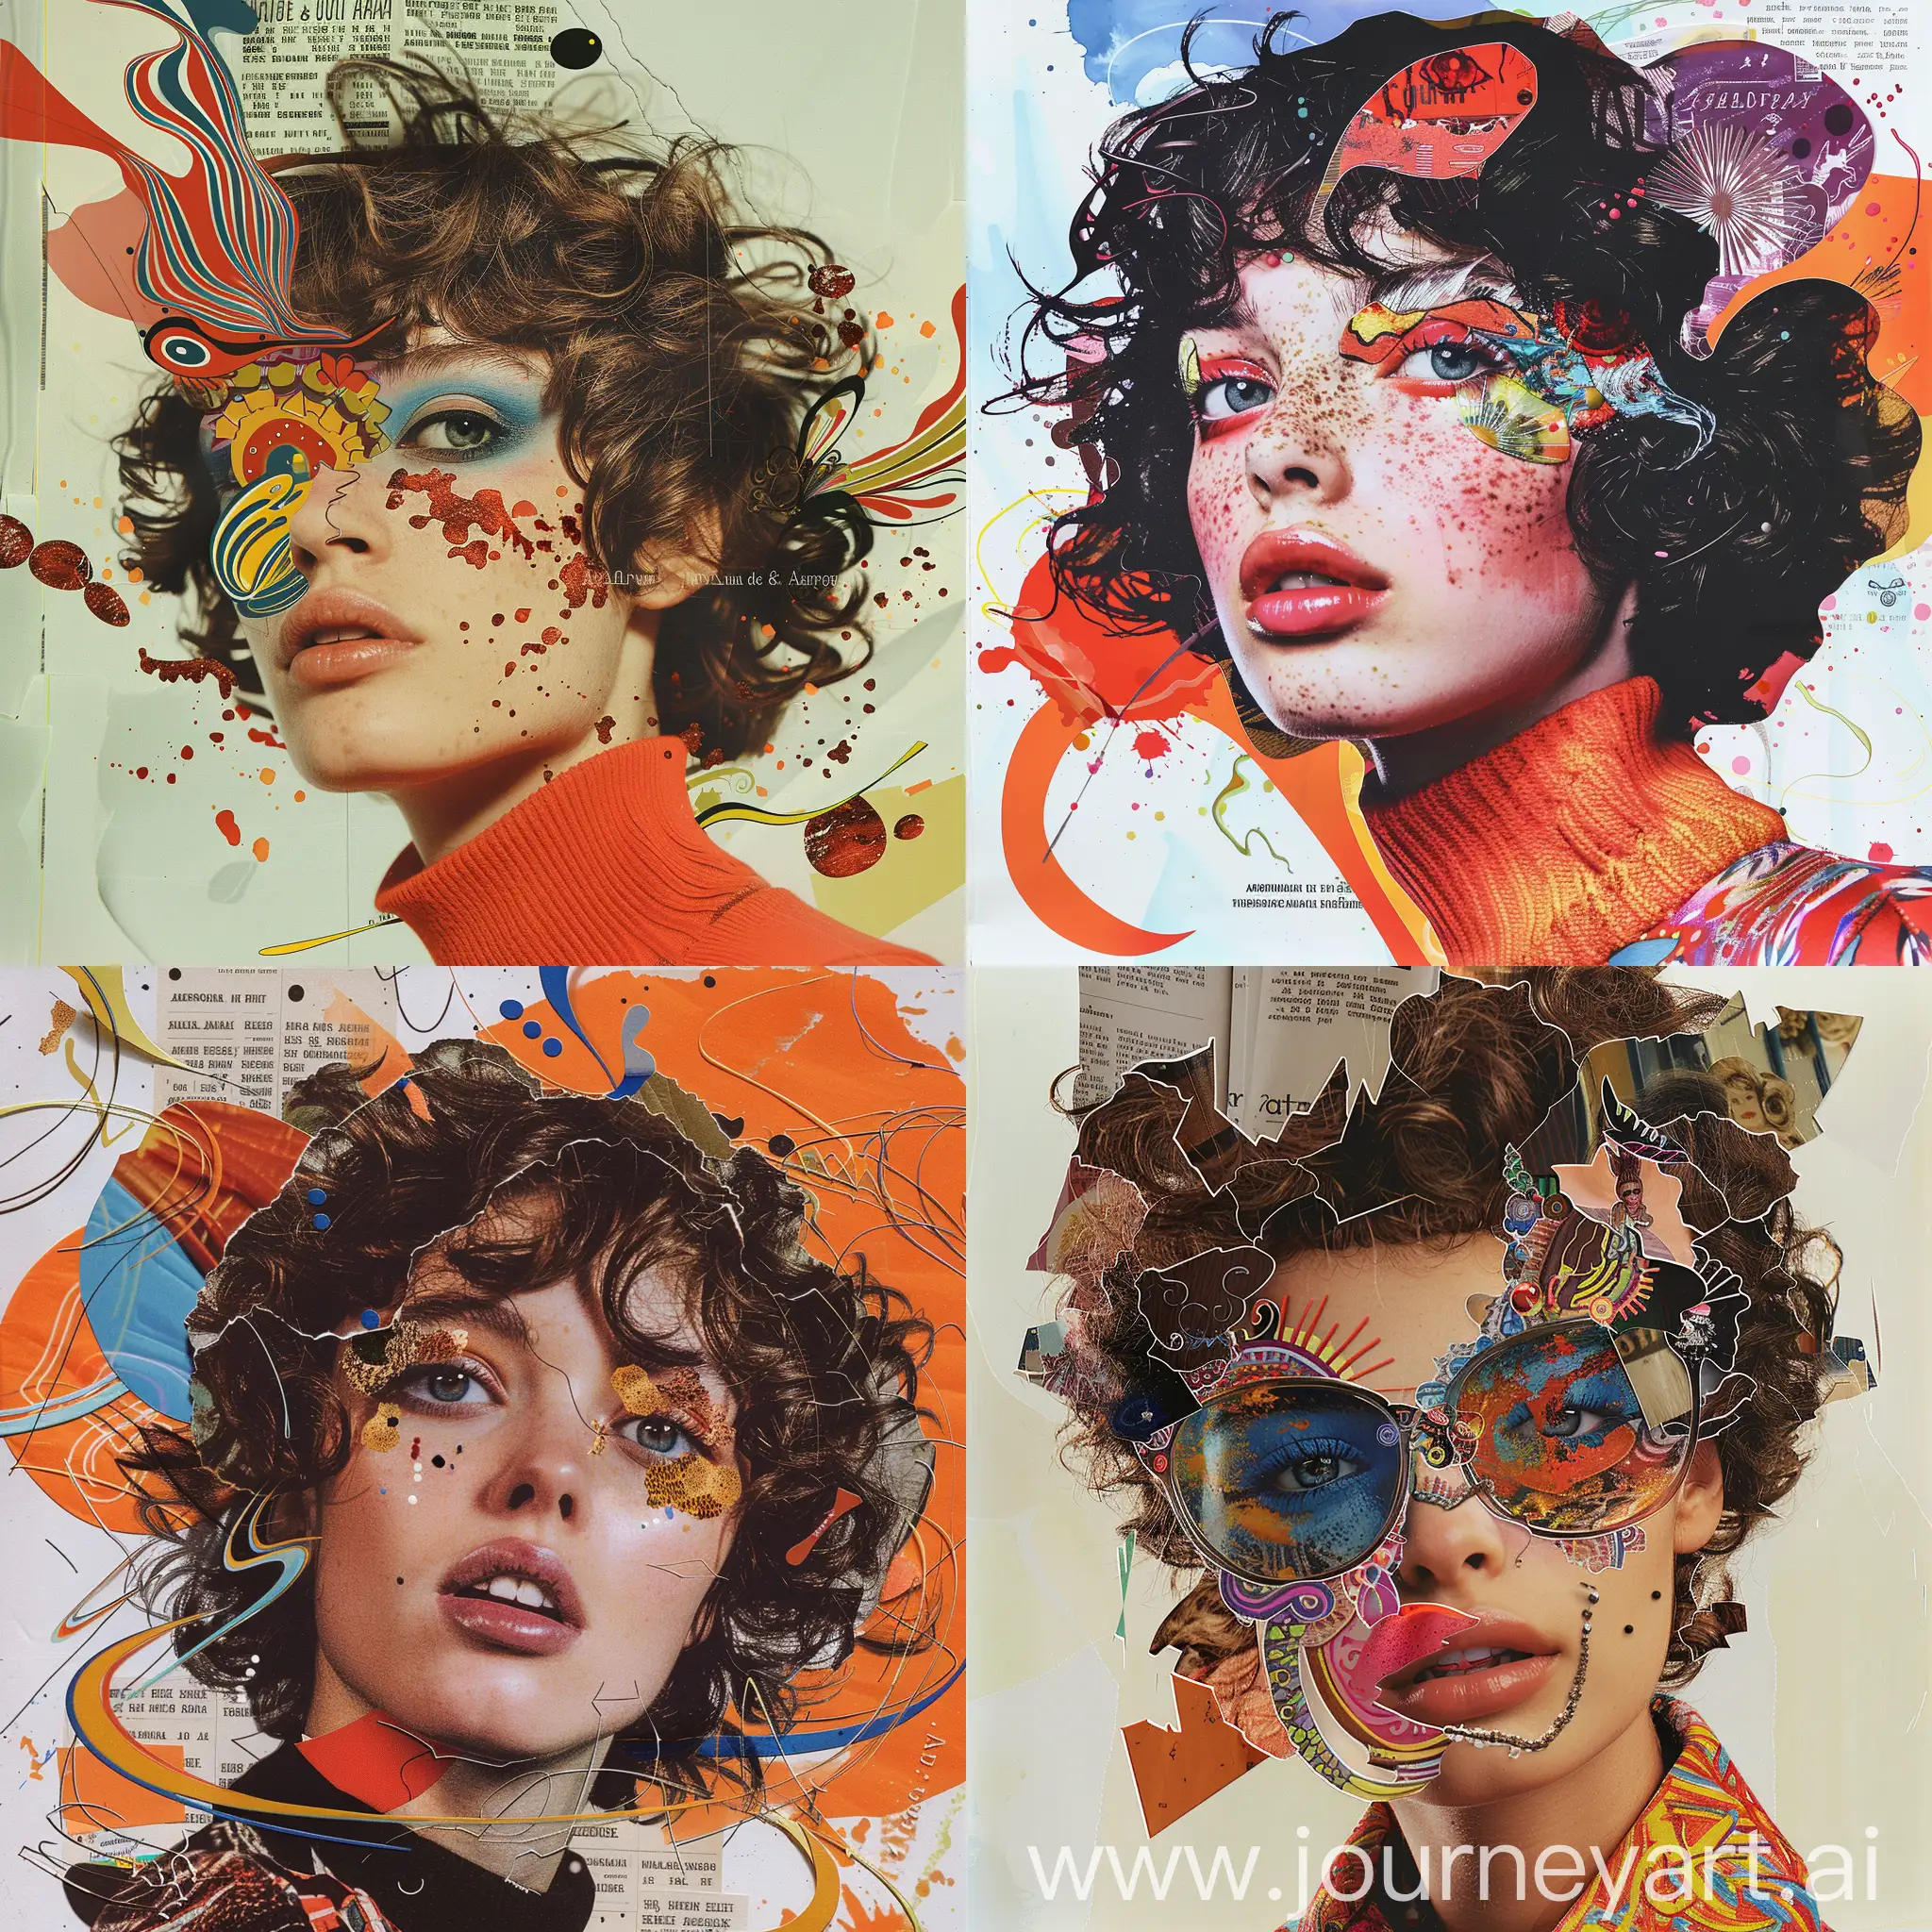 Boho-Chic-Magazine-Collage-with-Curly-Hair-and-Psychedelic-Splash